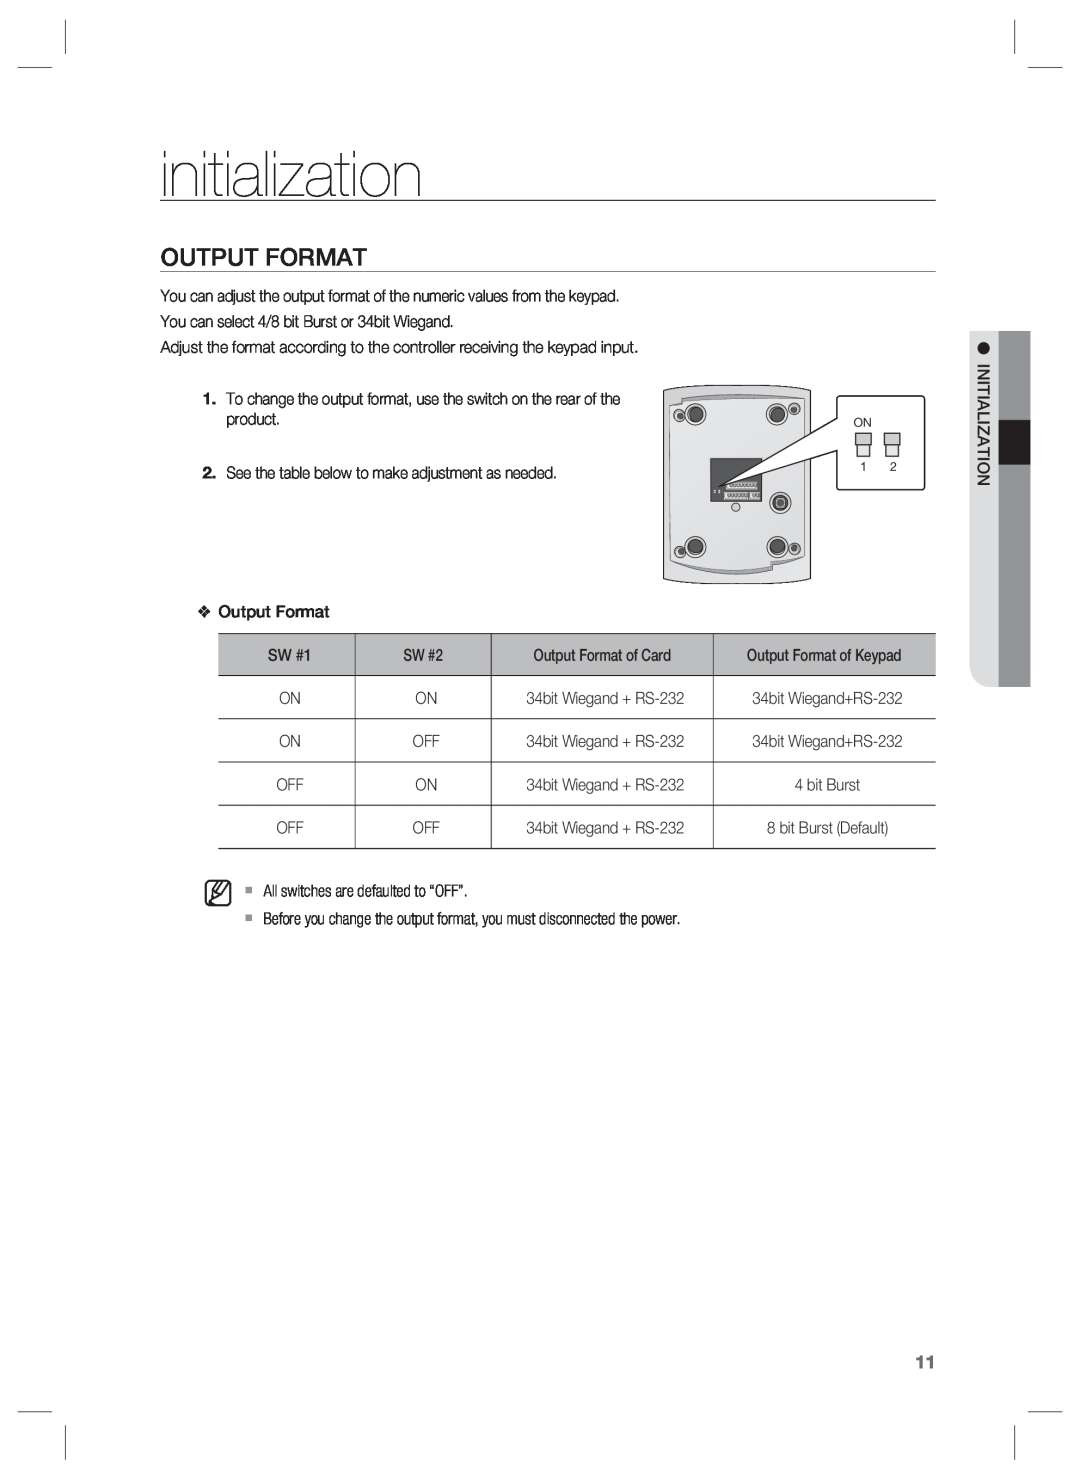 Samsung SSA-R2001 user manual initialization, Output Format 